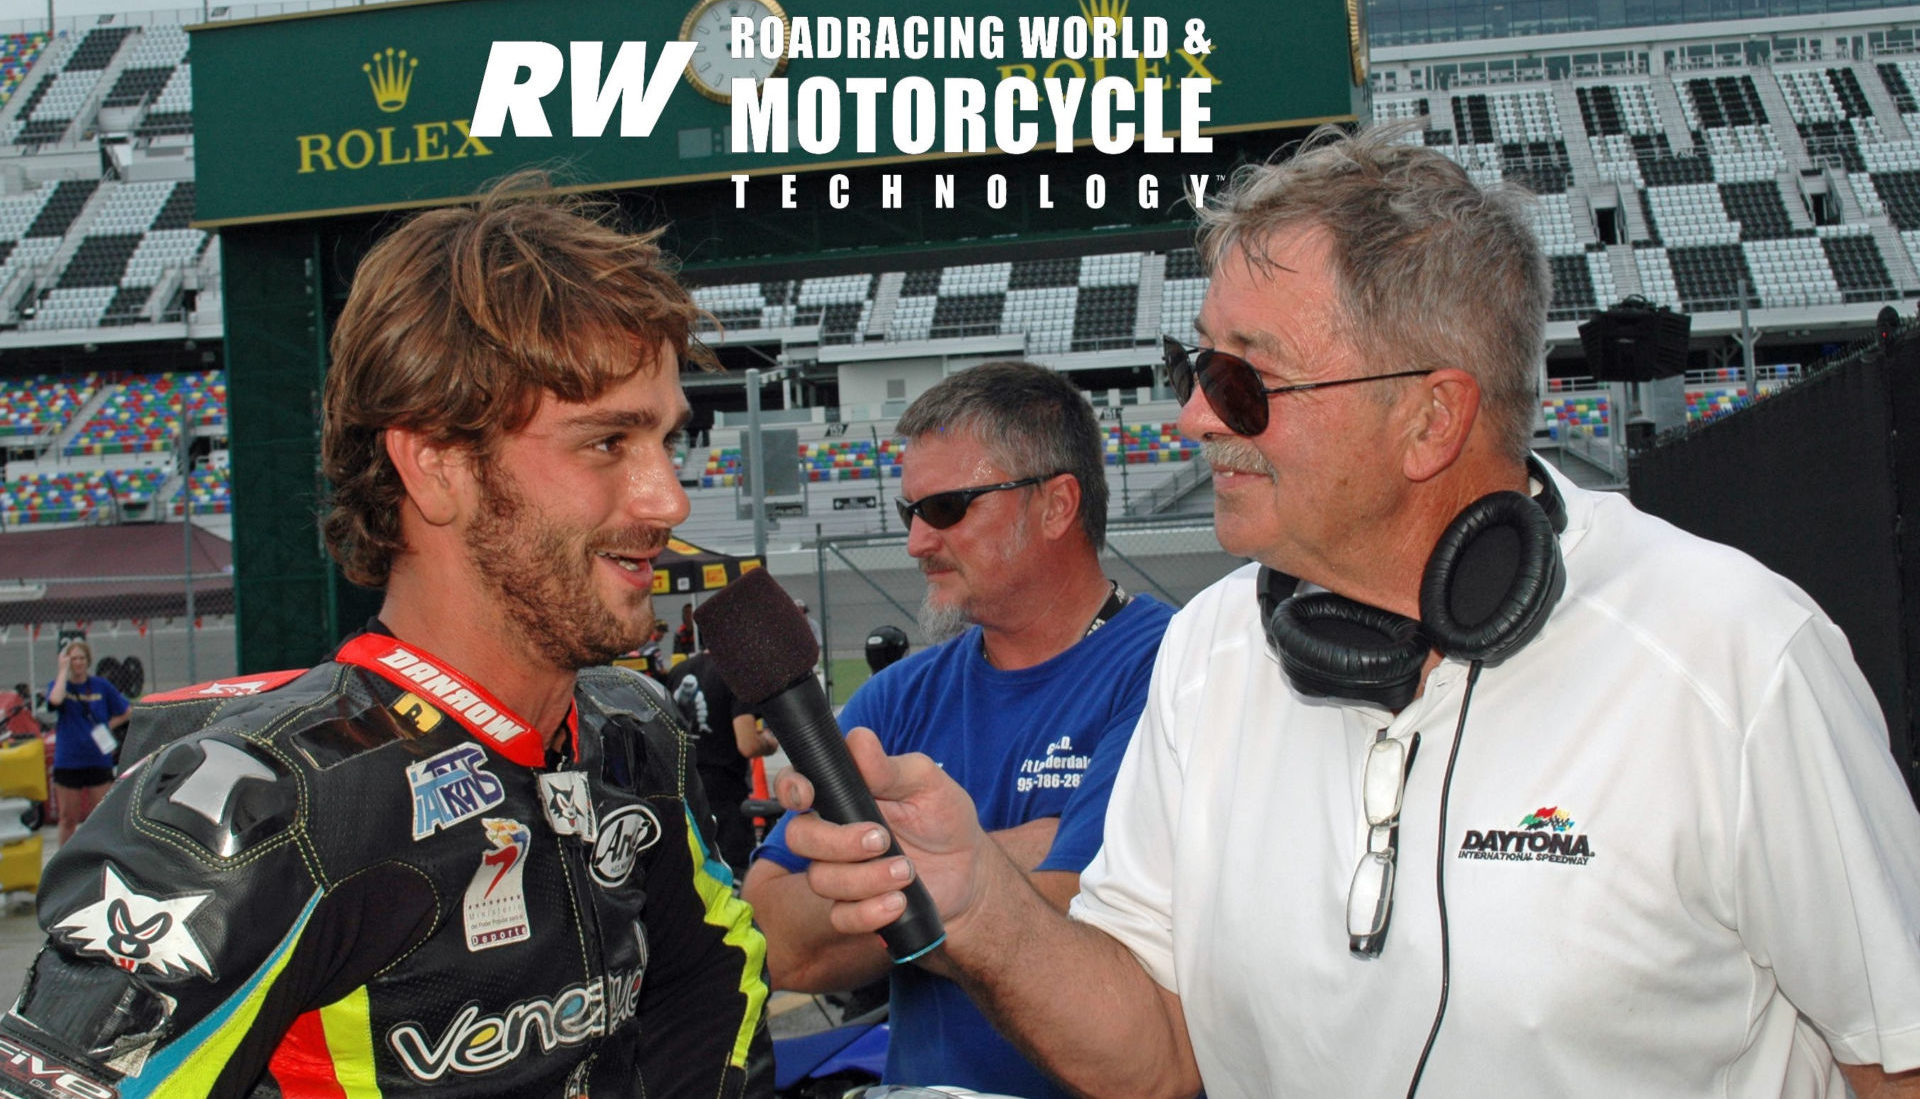 Daytona International Speedway public address announcer and former racer Richard Chambers (right) interviewing former Latin America Superbike Champion and current Sporting Director for the Italtrans Racing Moto2 World Championship team Robertino Pietri (left) at Daytona International Speedway in 2016. Photo by David Swarts.